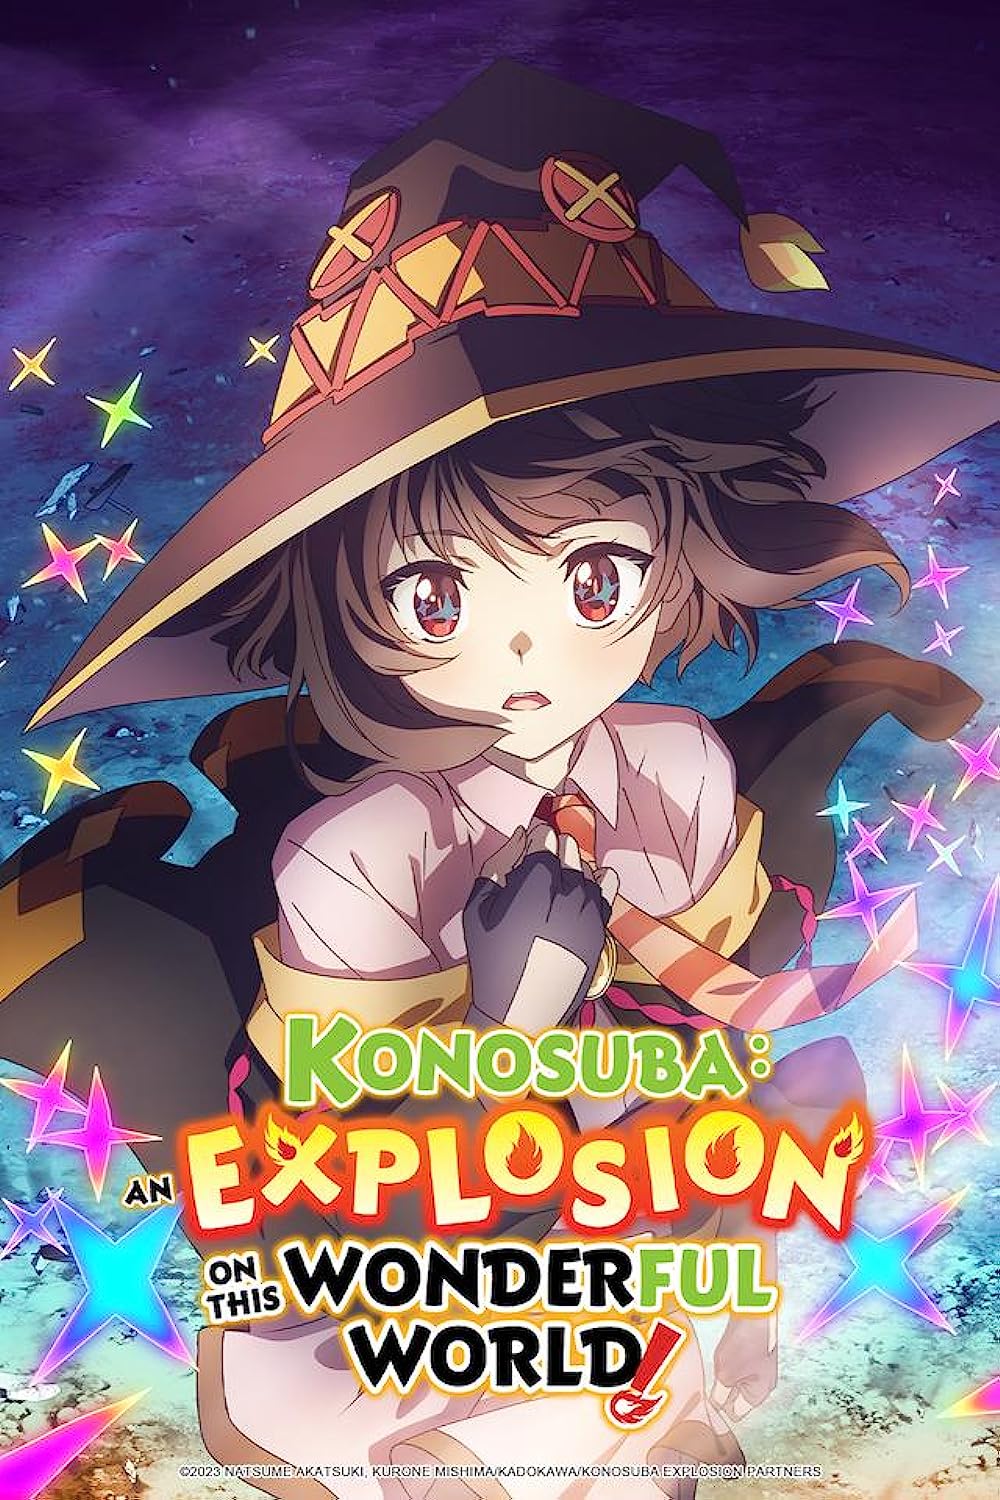 KonoSuba: An Explosion on This Wonderful World Delivers - A Lively